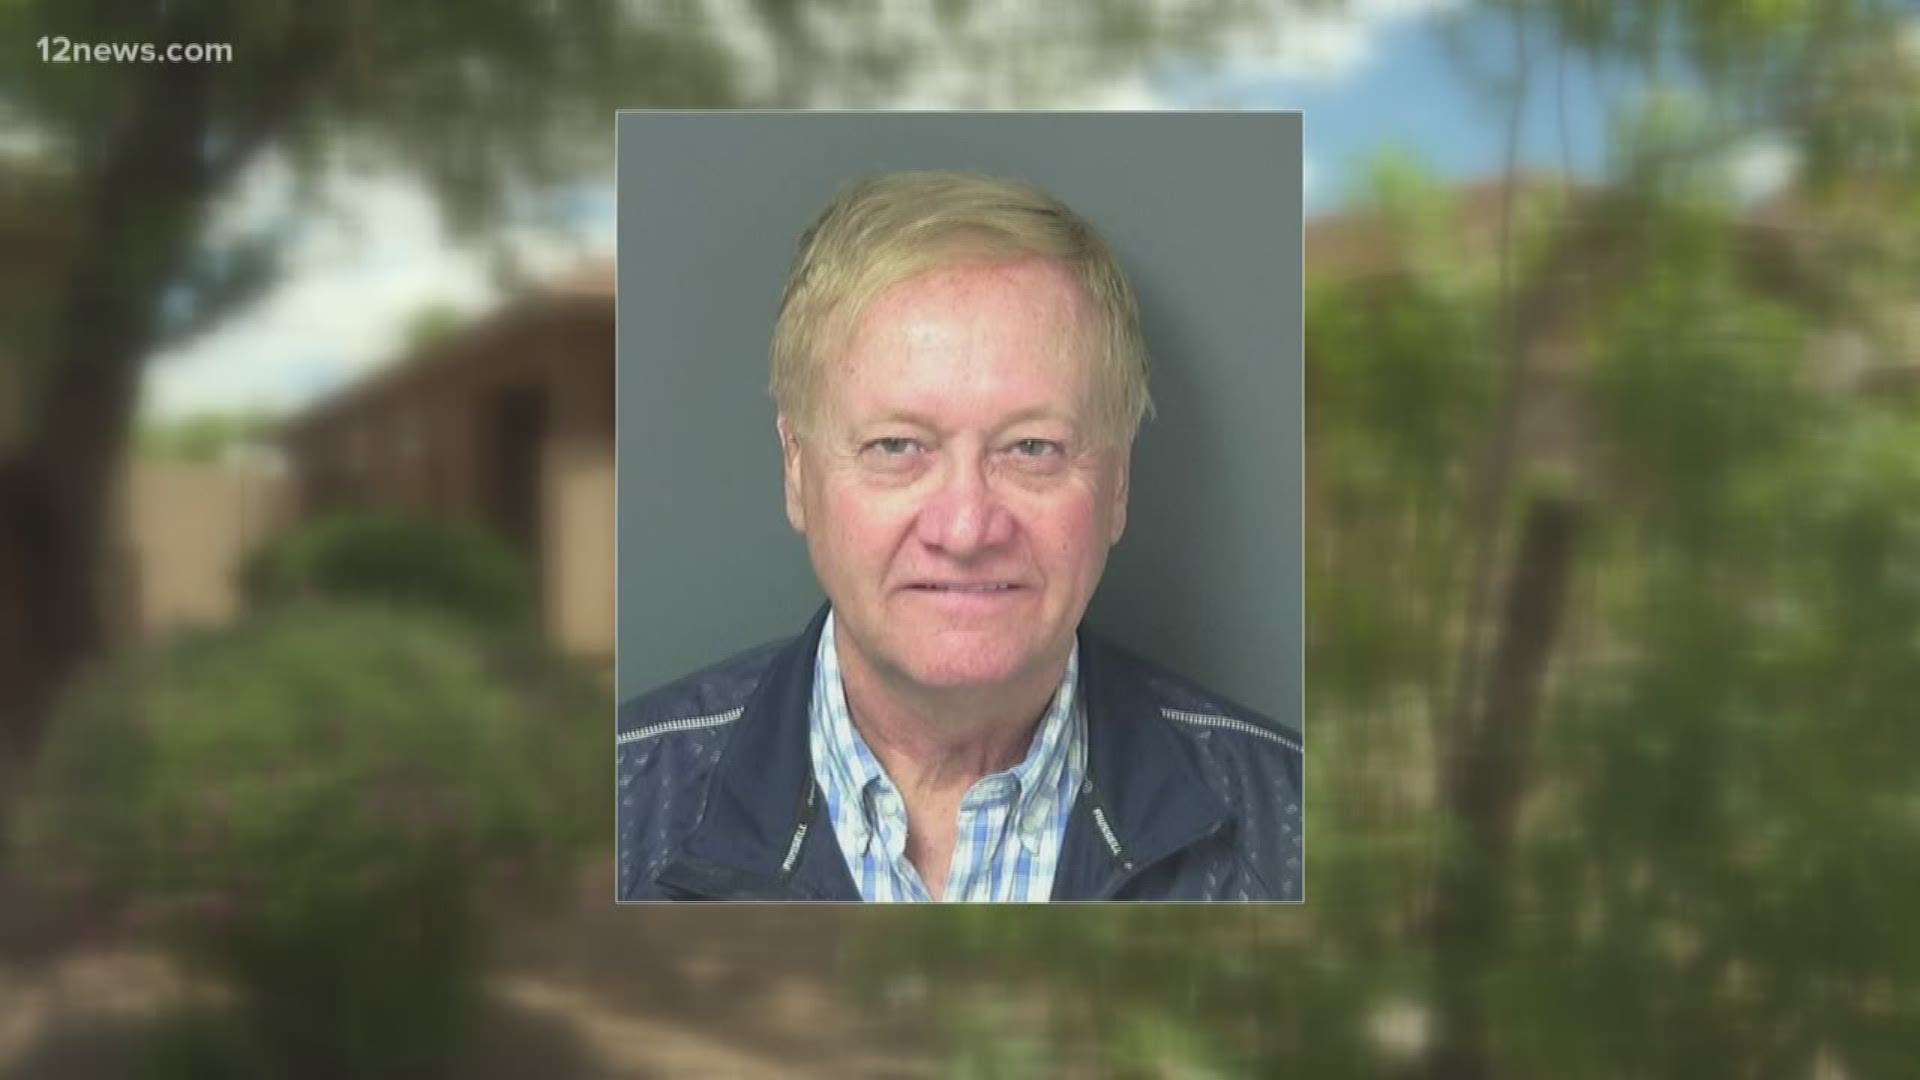 Pinal County Sheriff's investigators say 66-year-old Daniel Shannon buried his deceased mother in his backyard. According to investigators Shannon admitted to burying her in the backyard so he could continue collecting her veteran's benefits.